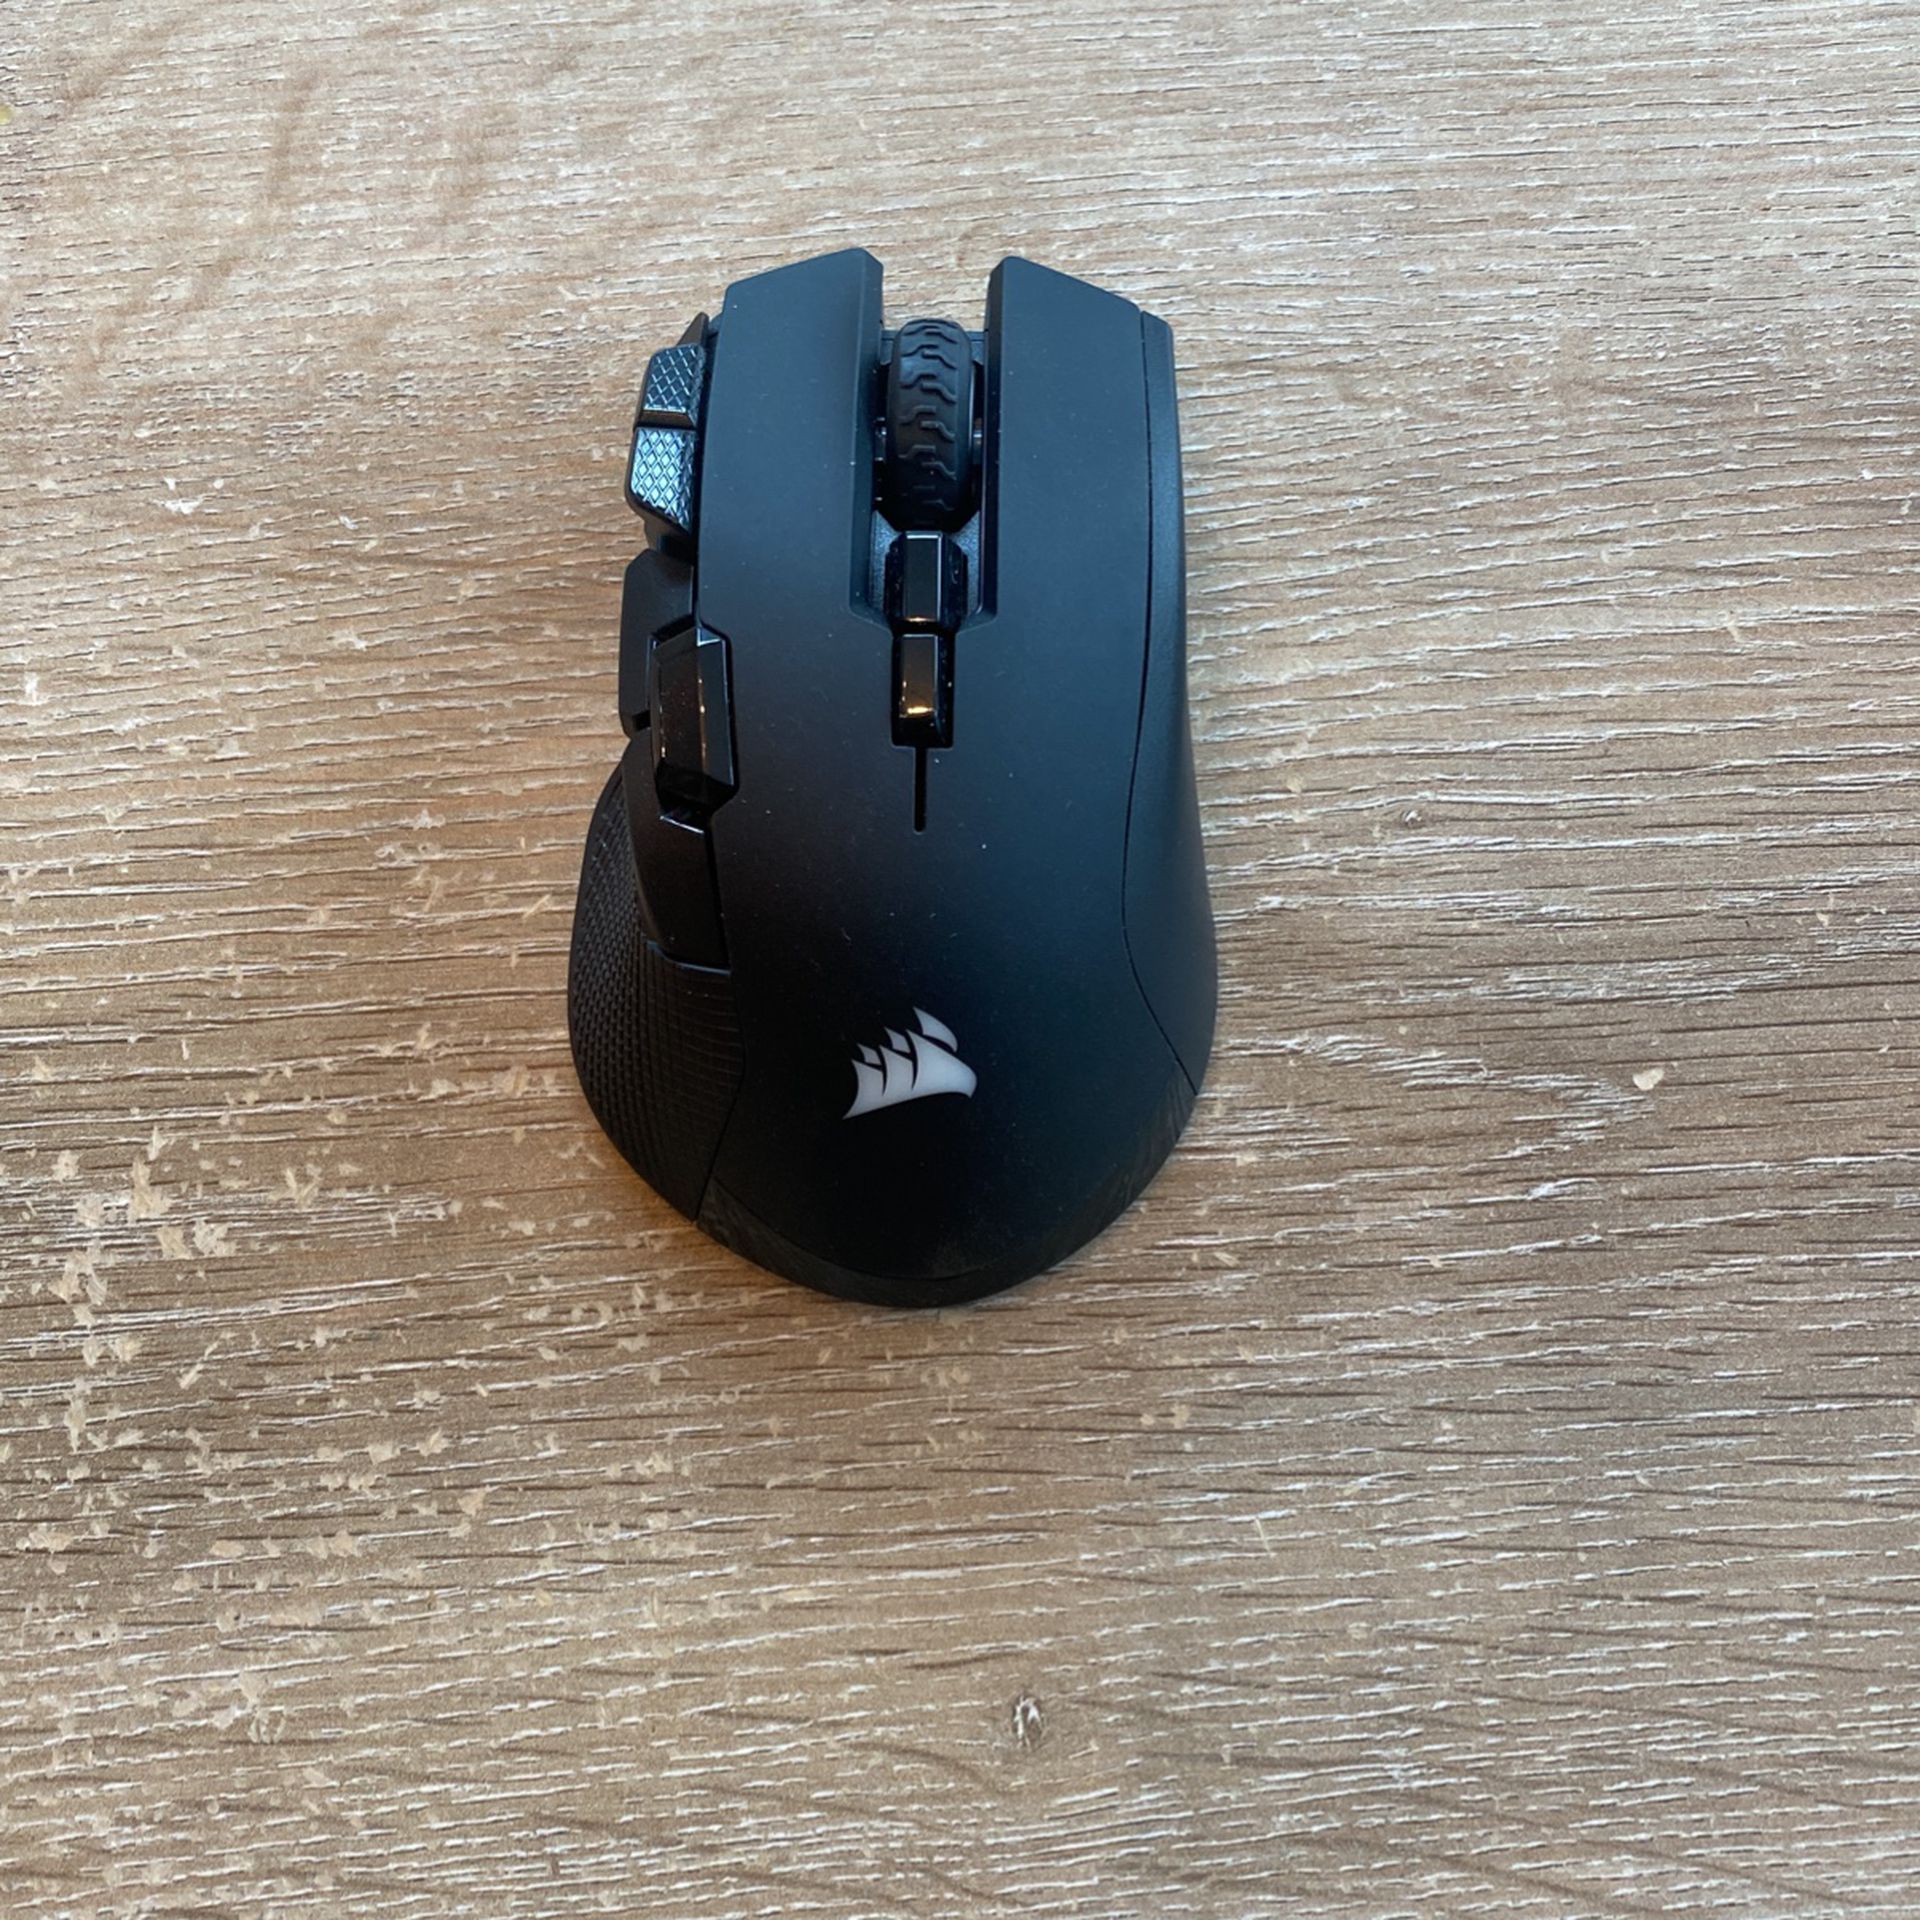 Corsair Iron Claw Gaming Mouse